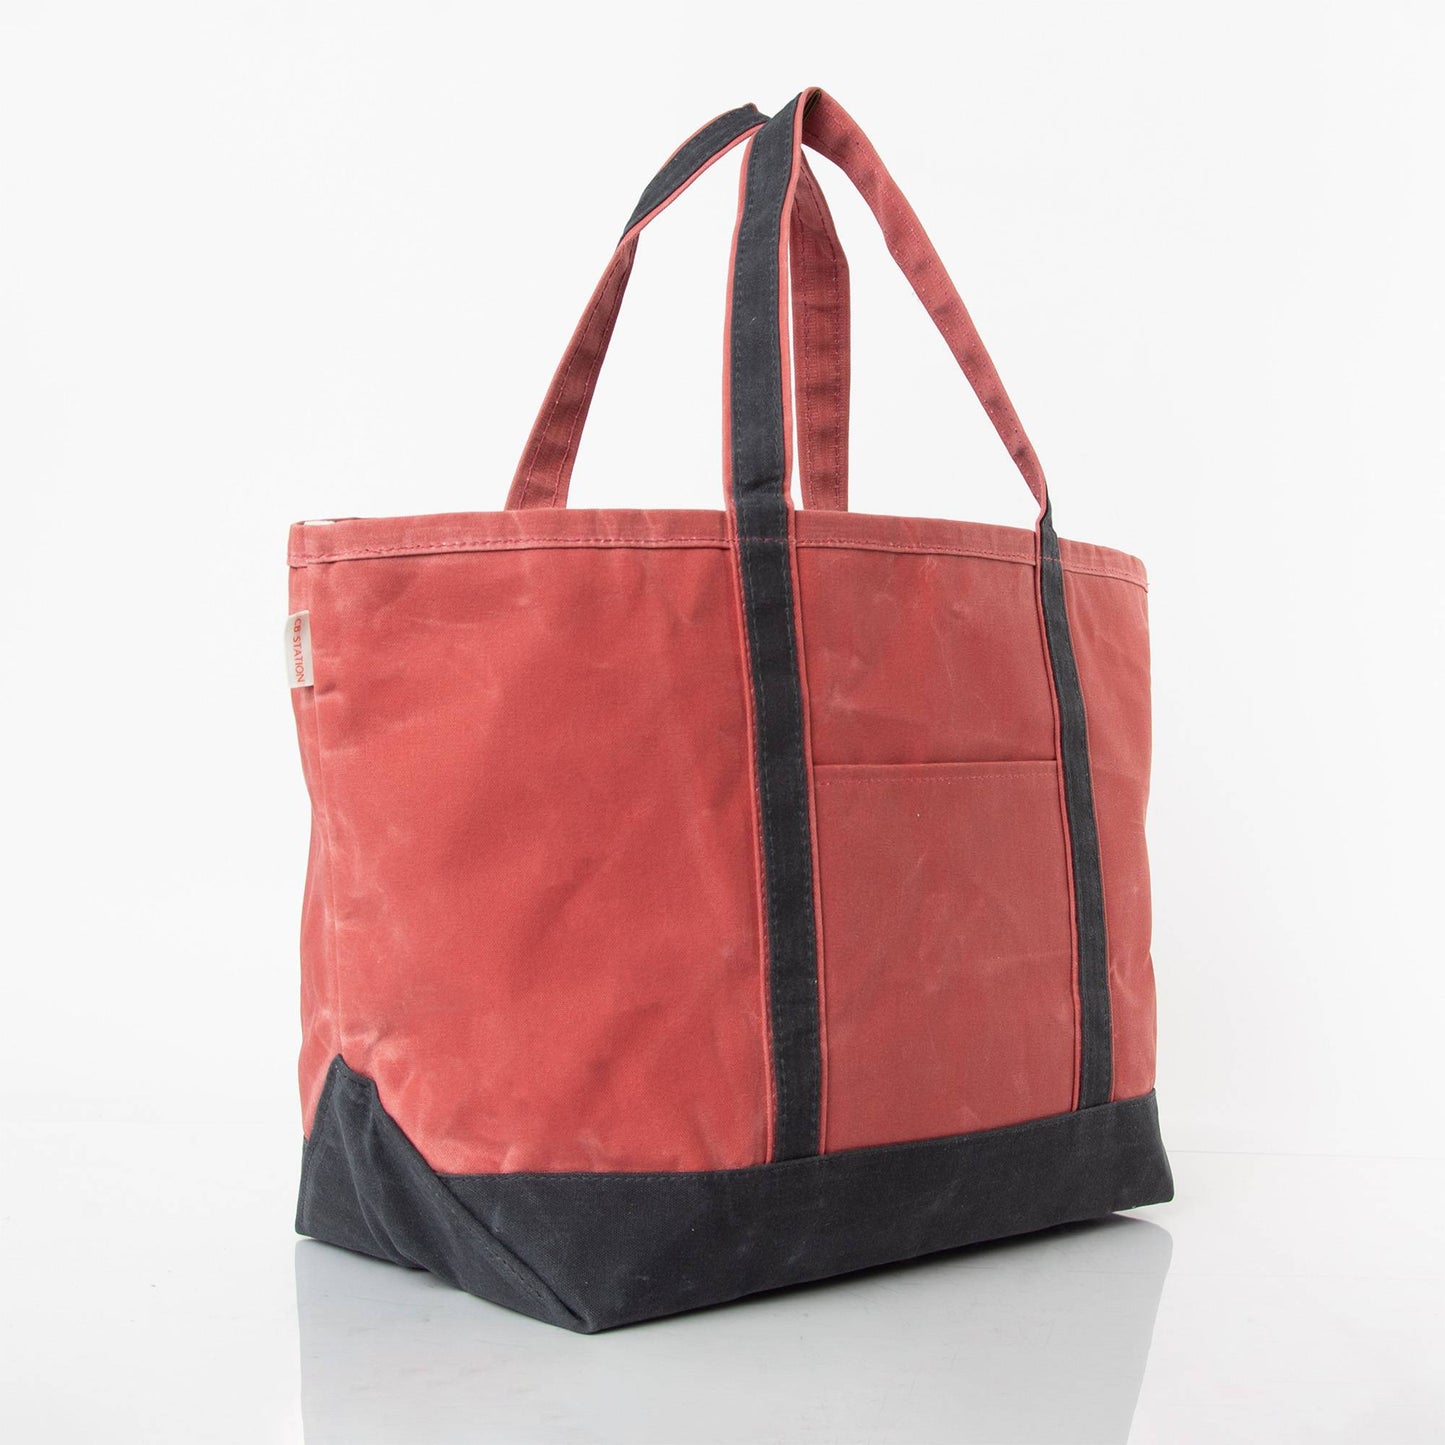 NANTUCKET RED WAXED CANVAS TOTE